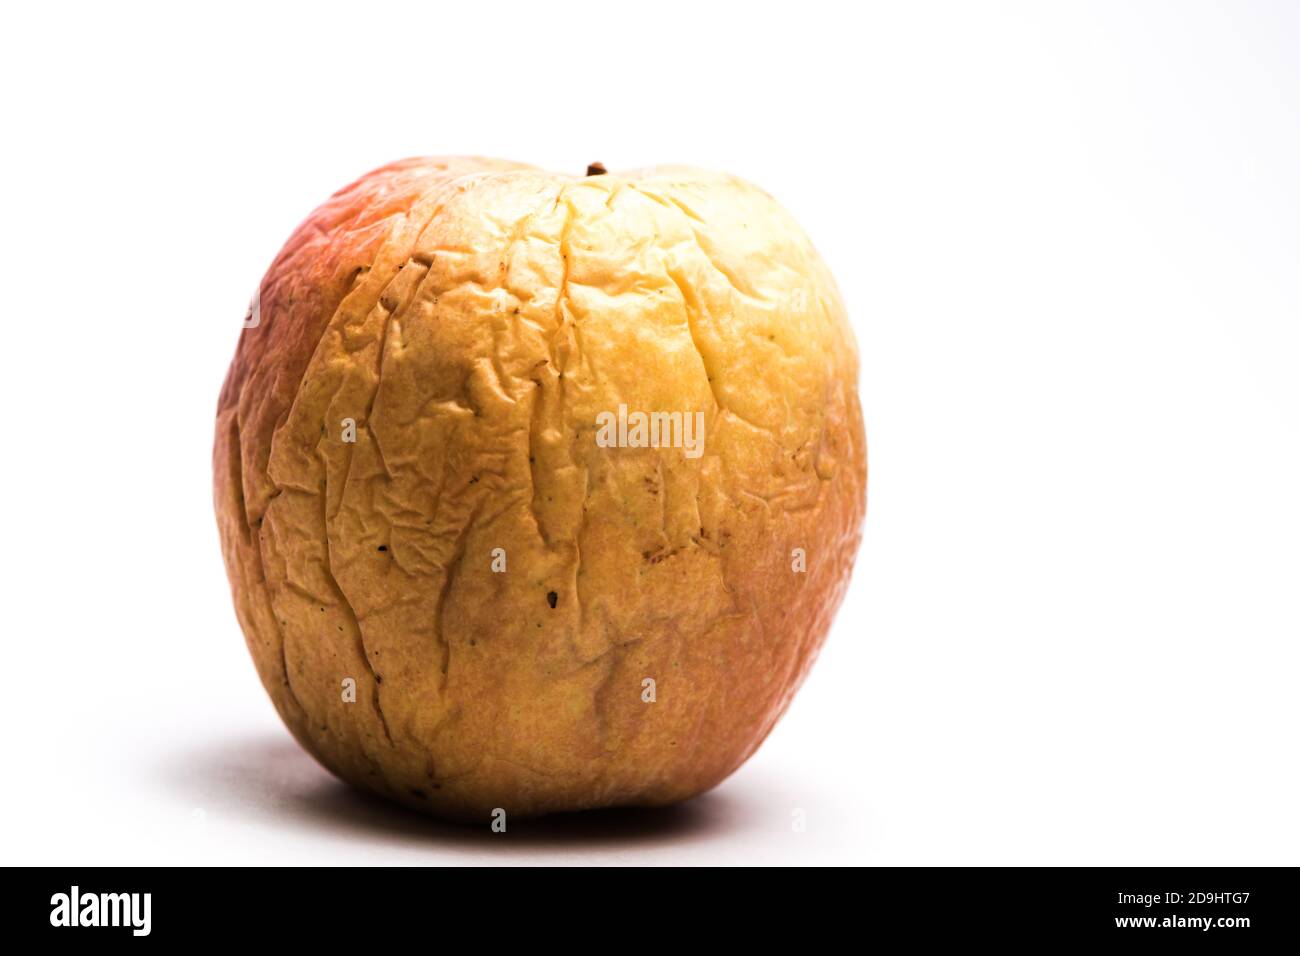 Shriveled yellow and red apple with deep wrinkles on white background.  Concept of aging. Stock Photo